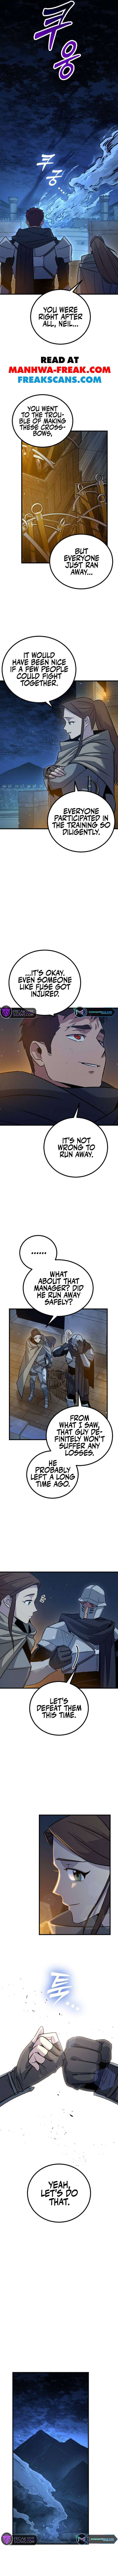 Manager Seo Industrial Accident - chapter 18 - #4